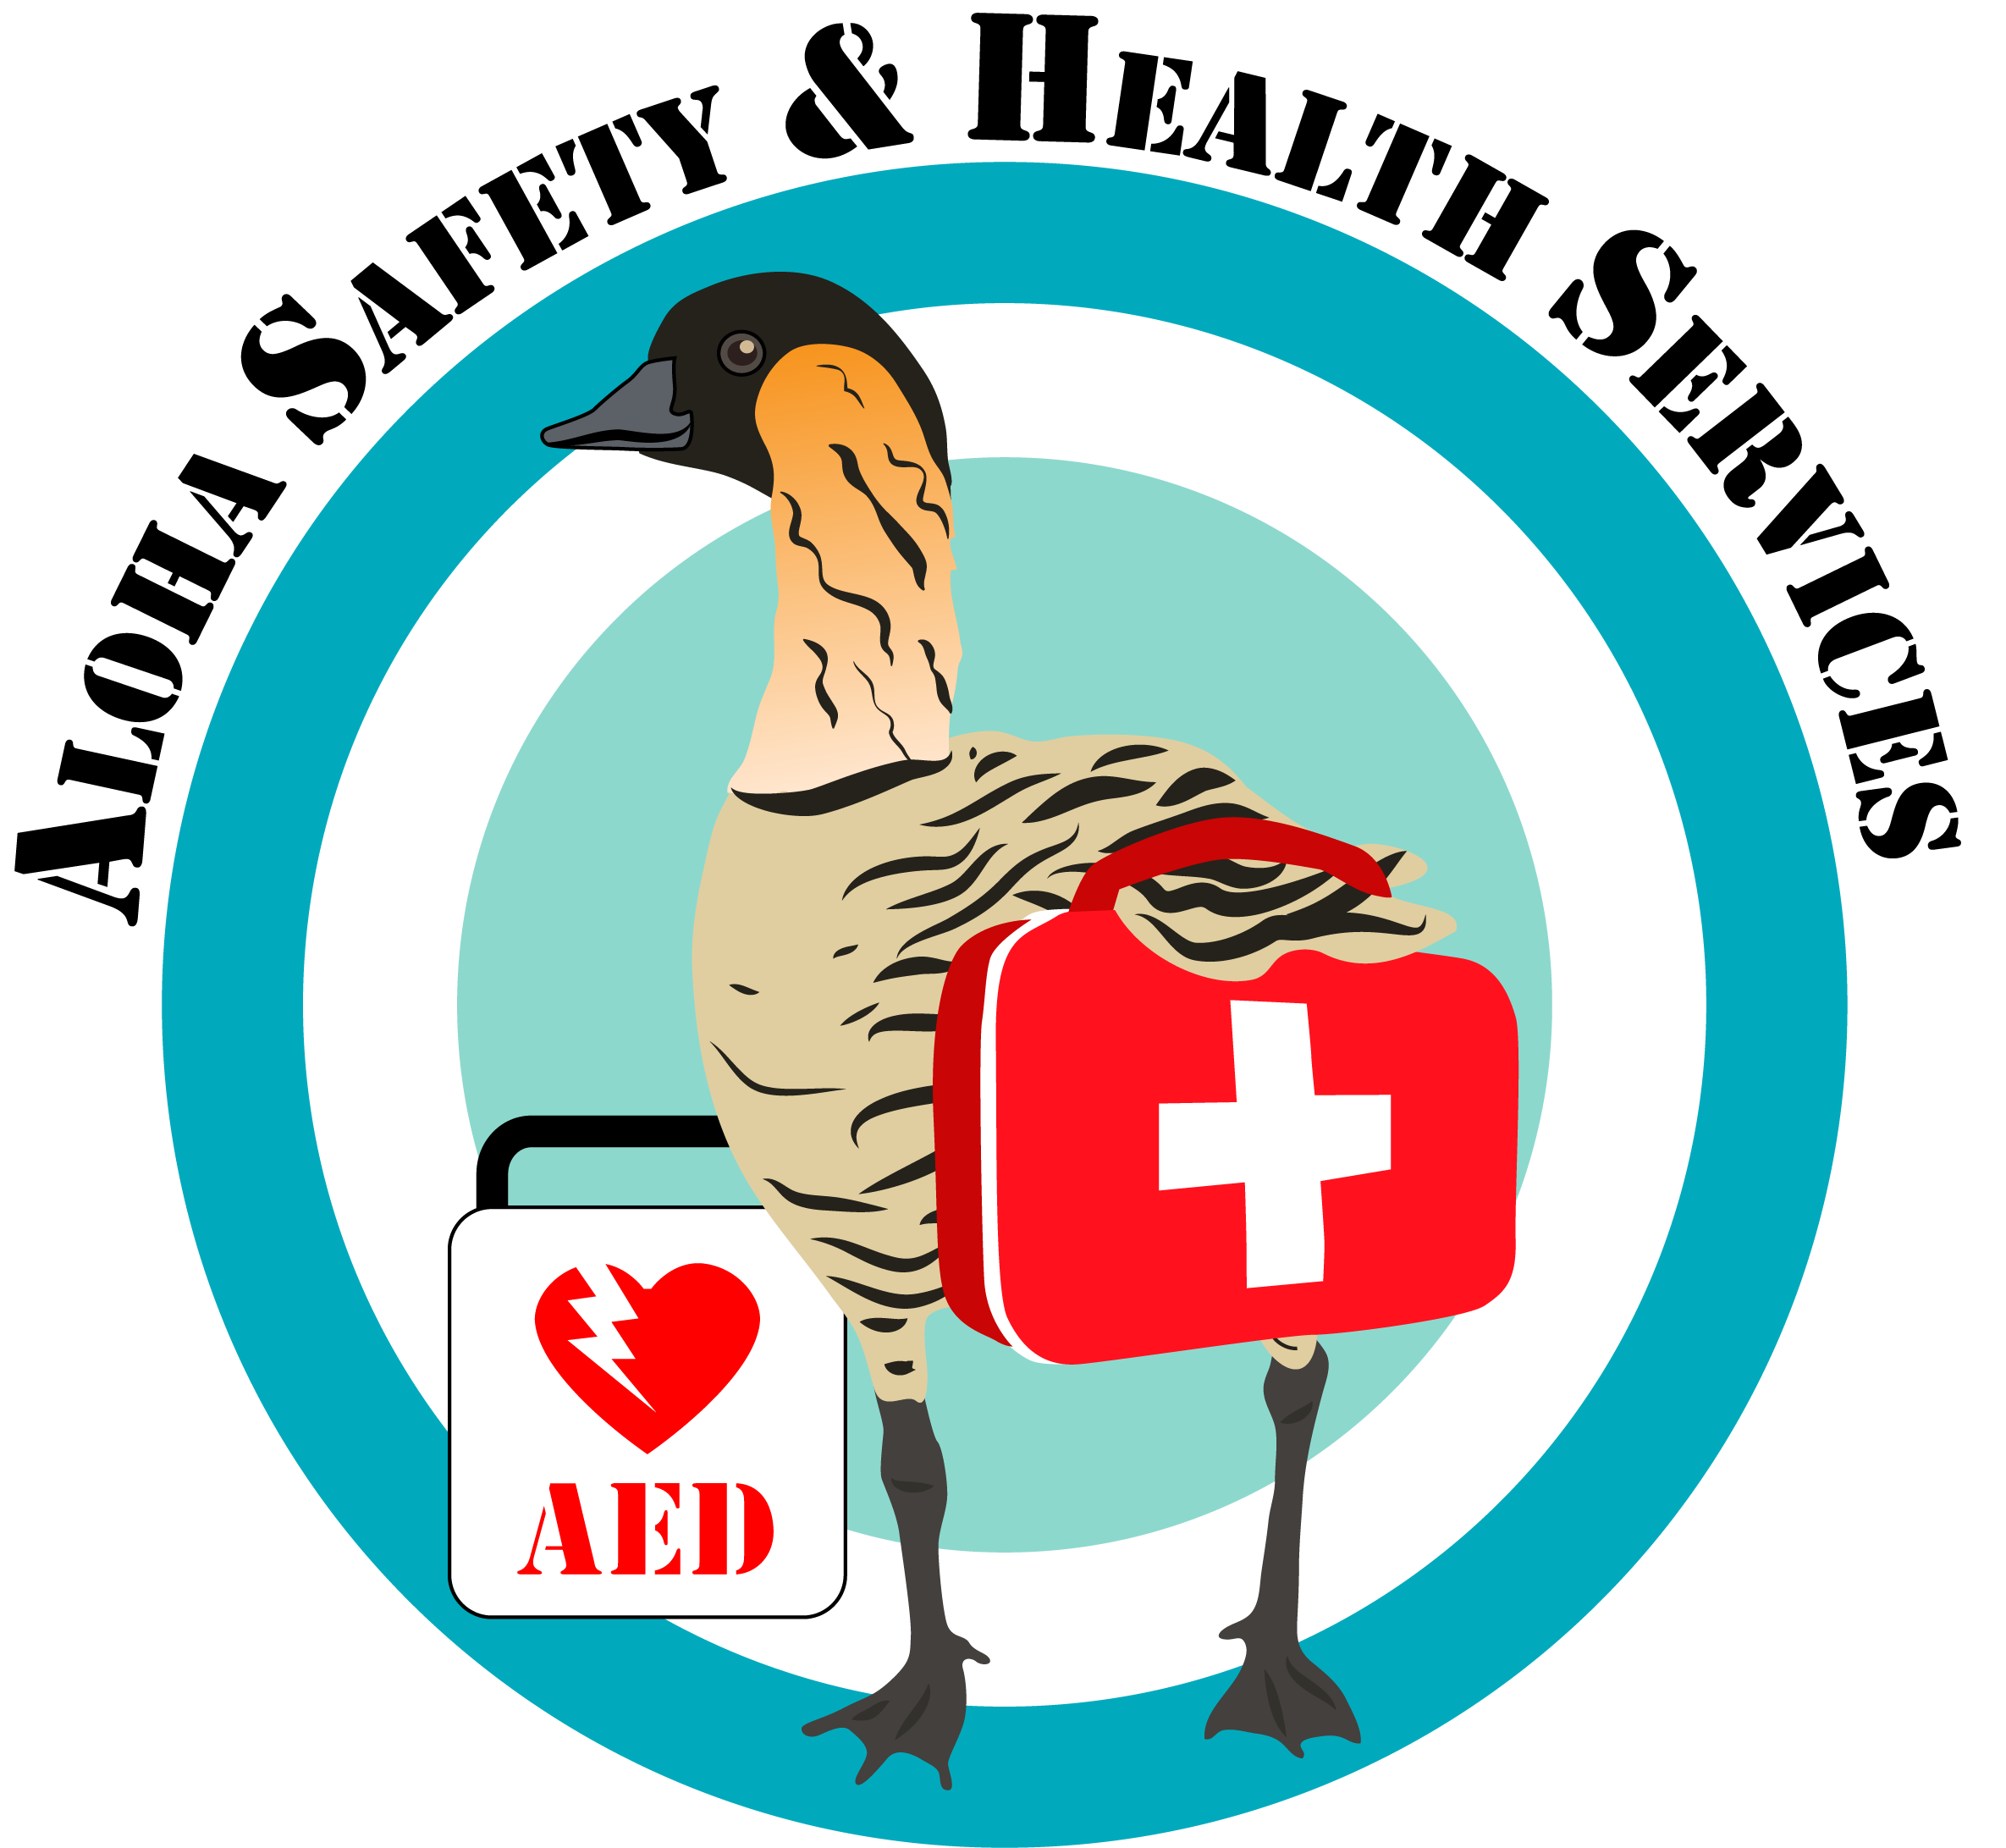 Aloha Safety and Health Services logo with a nene holding a first aid kit next to an AED.